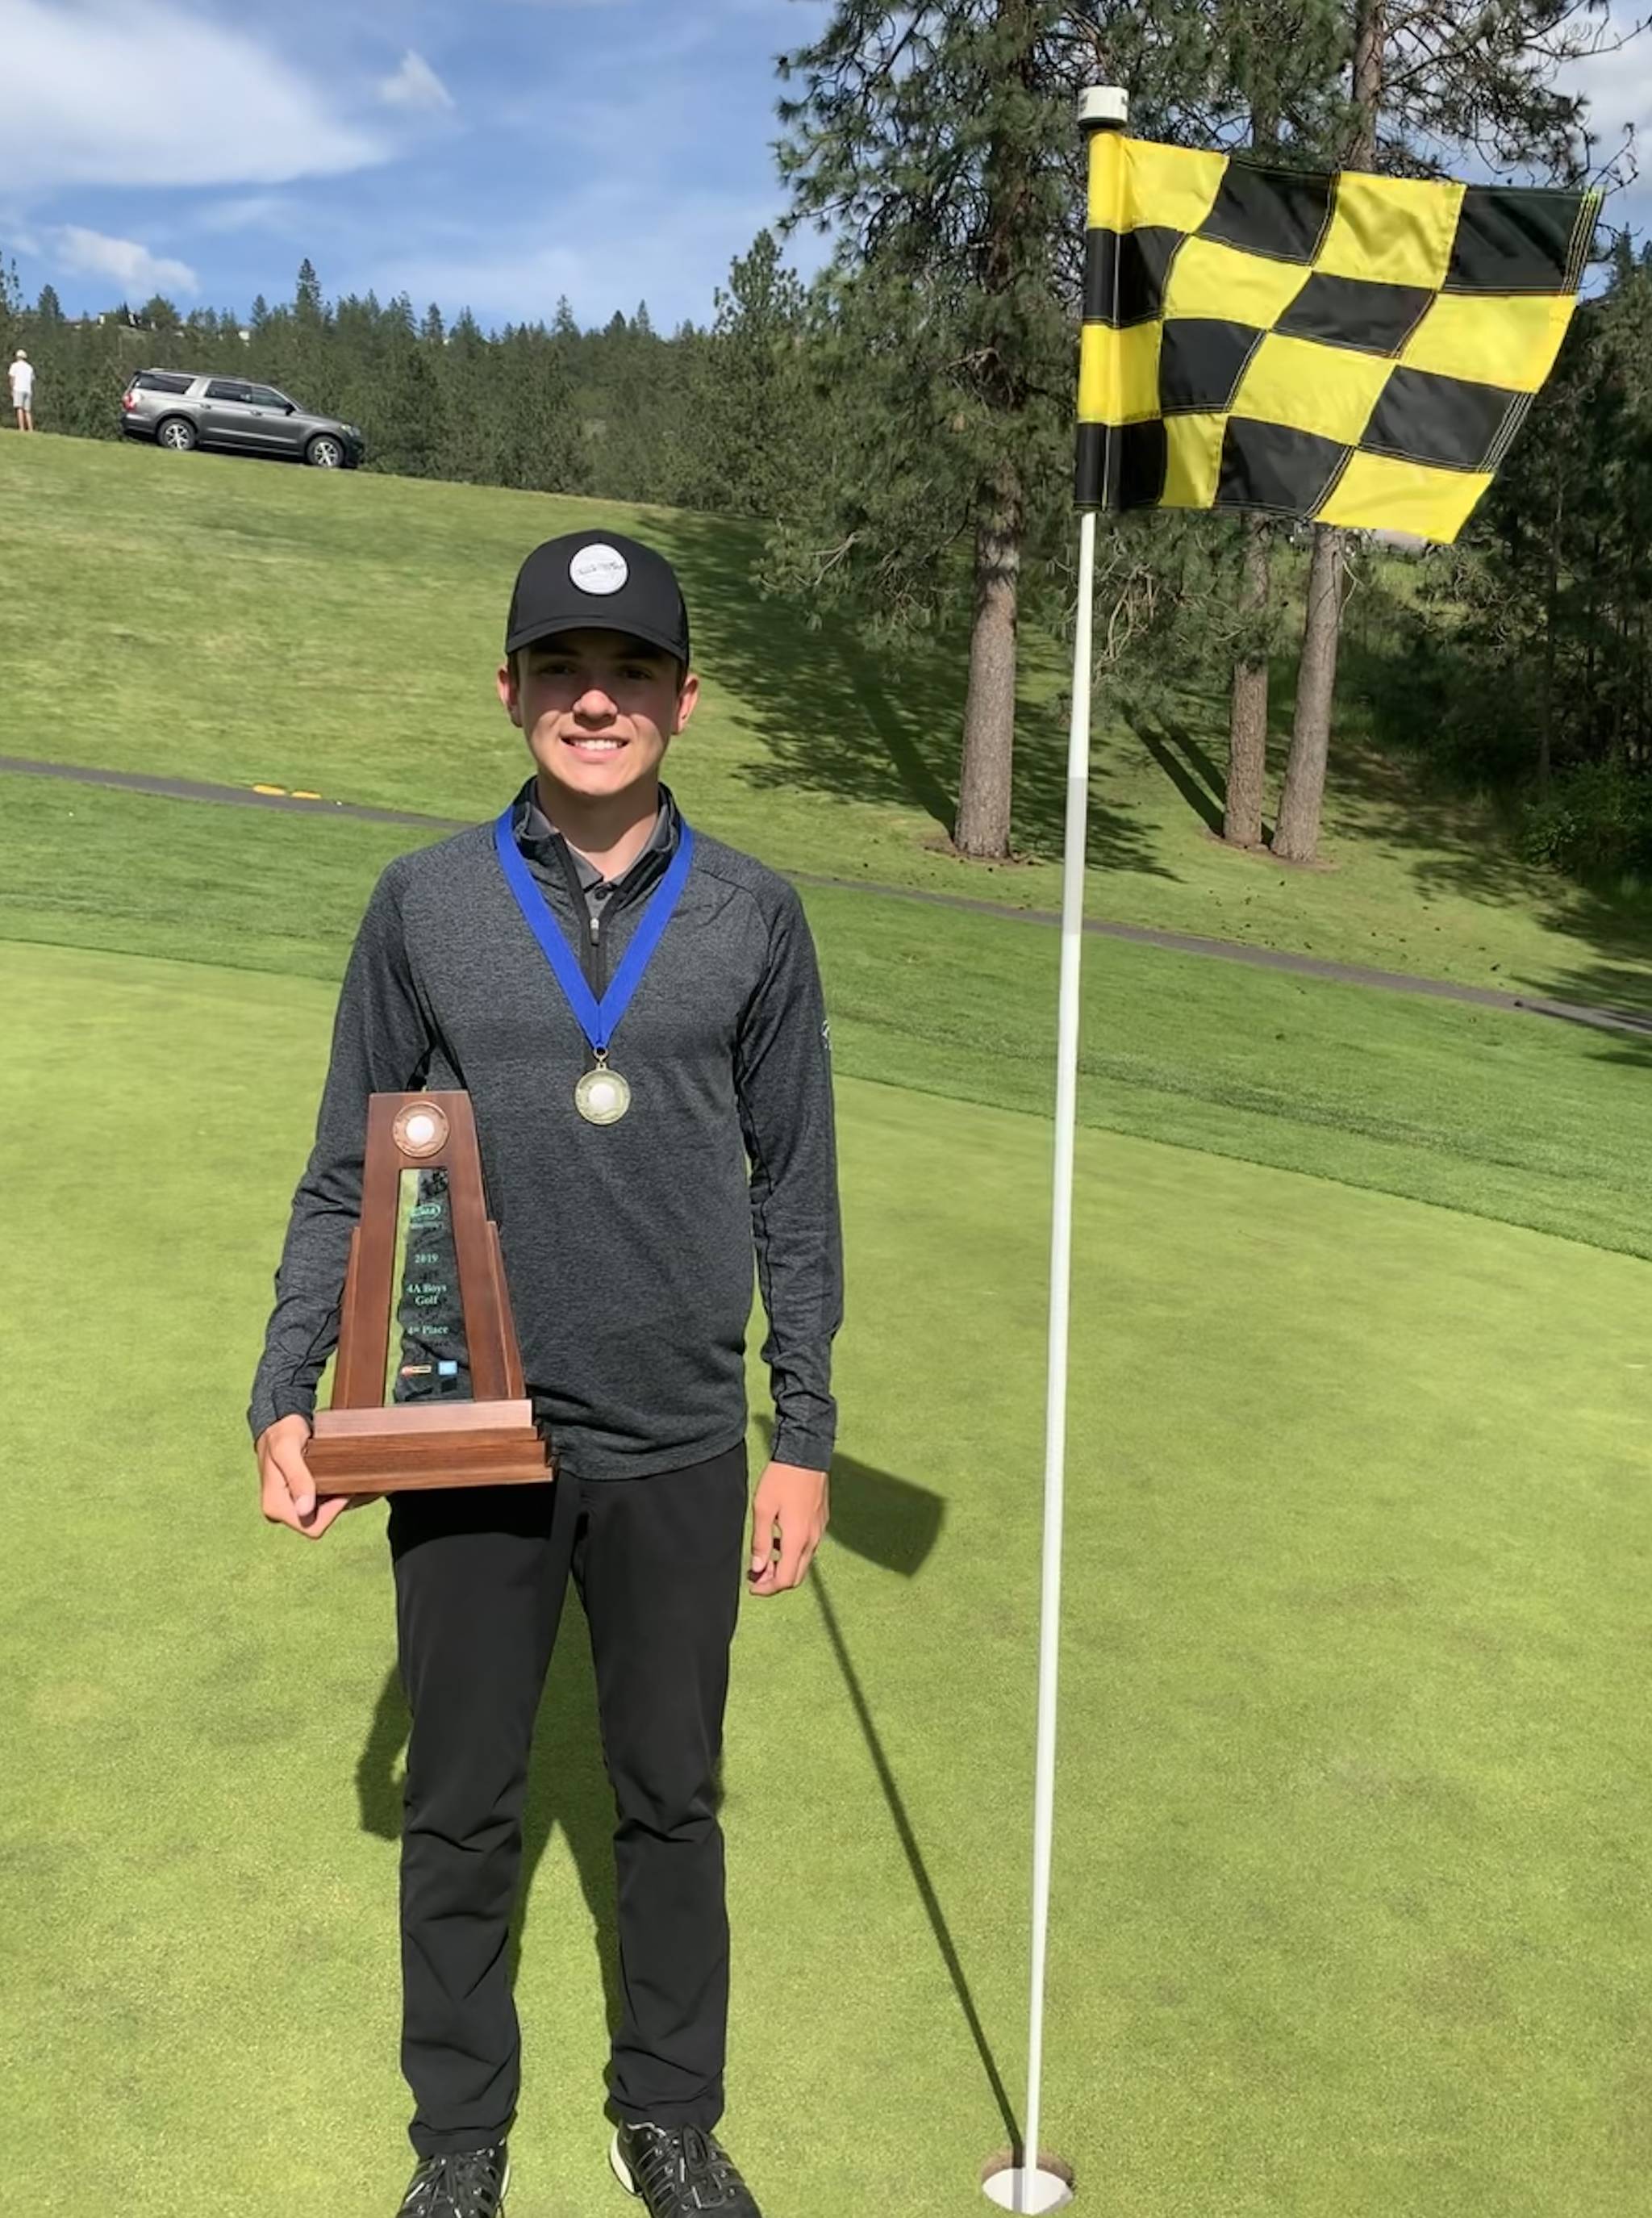 Mount Si’s Drew Warford sports his first-place medal and holds the team’s fourth-place trophy at The Creek at Qualchan Golf Course in Spokane. Courtesy photo